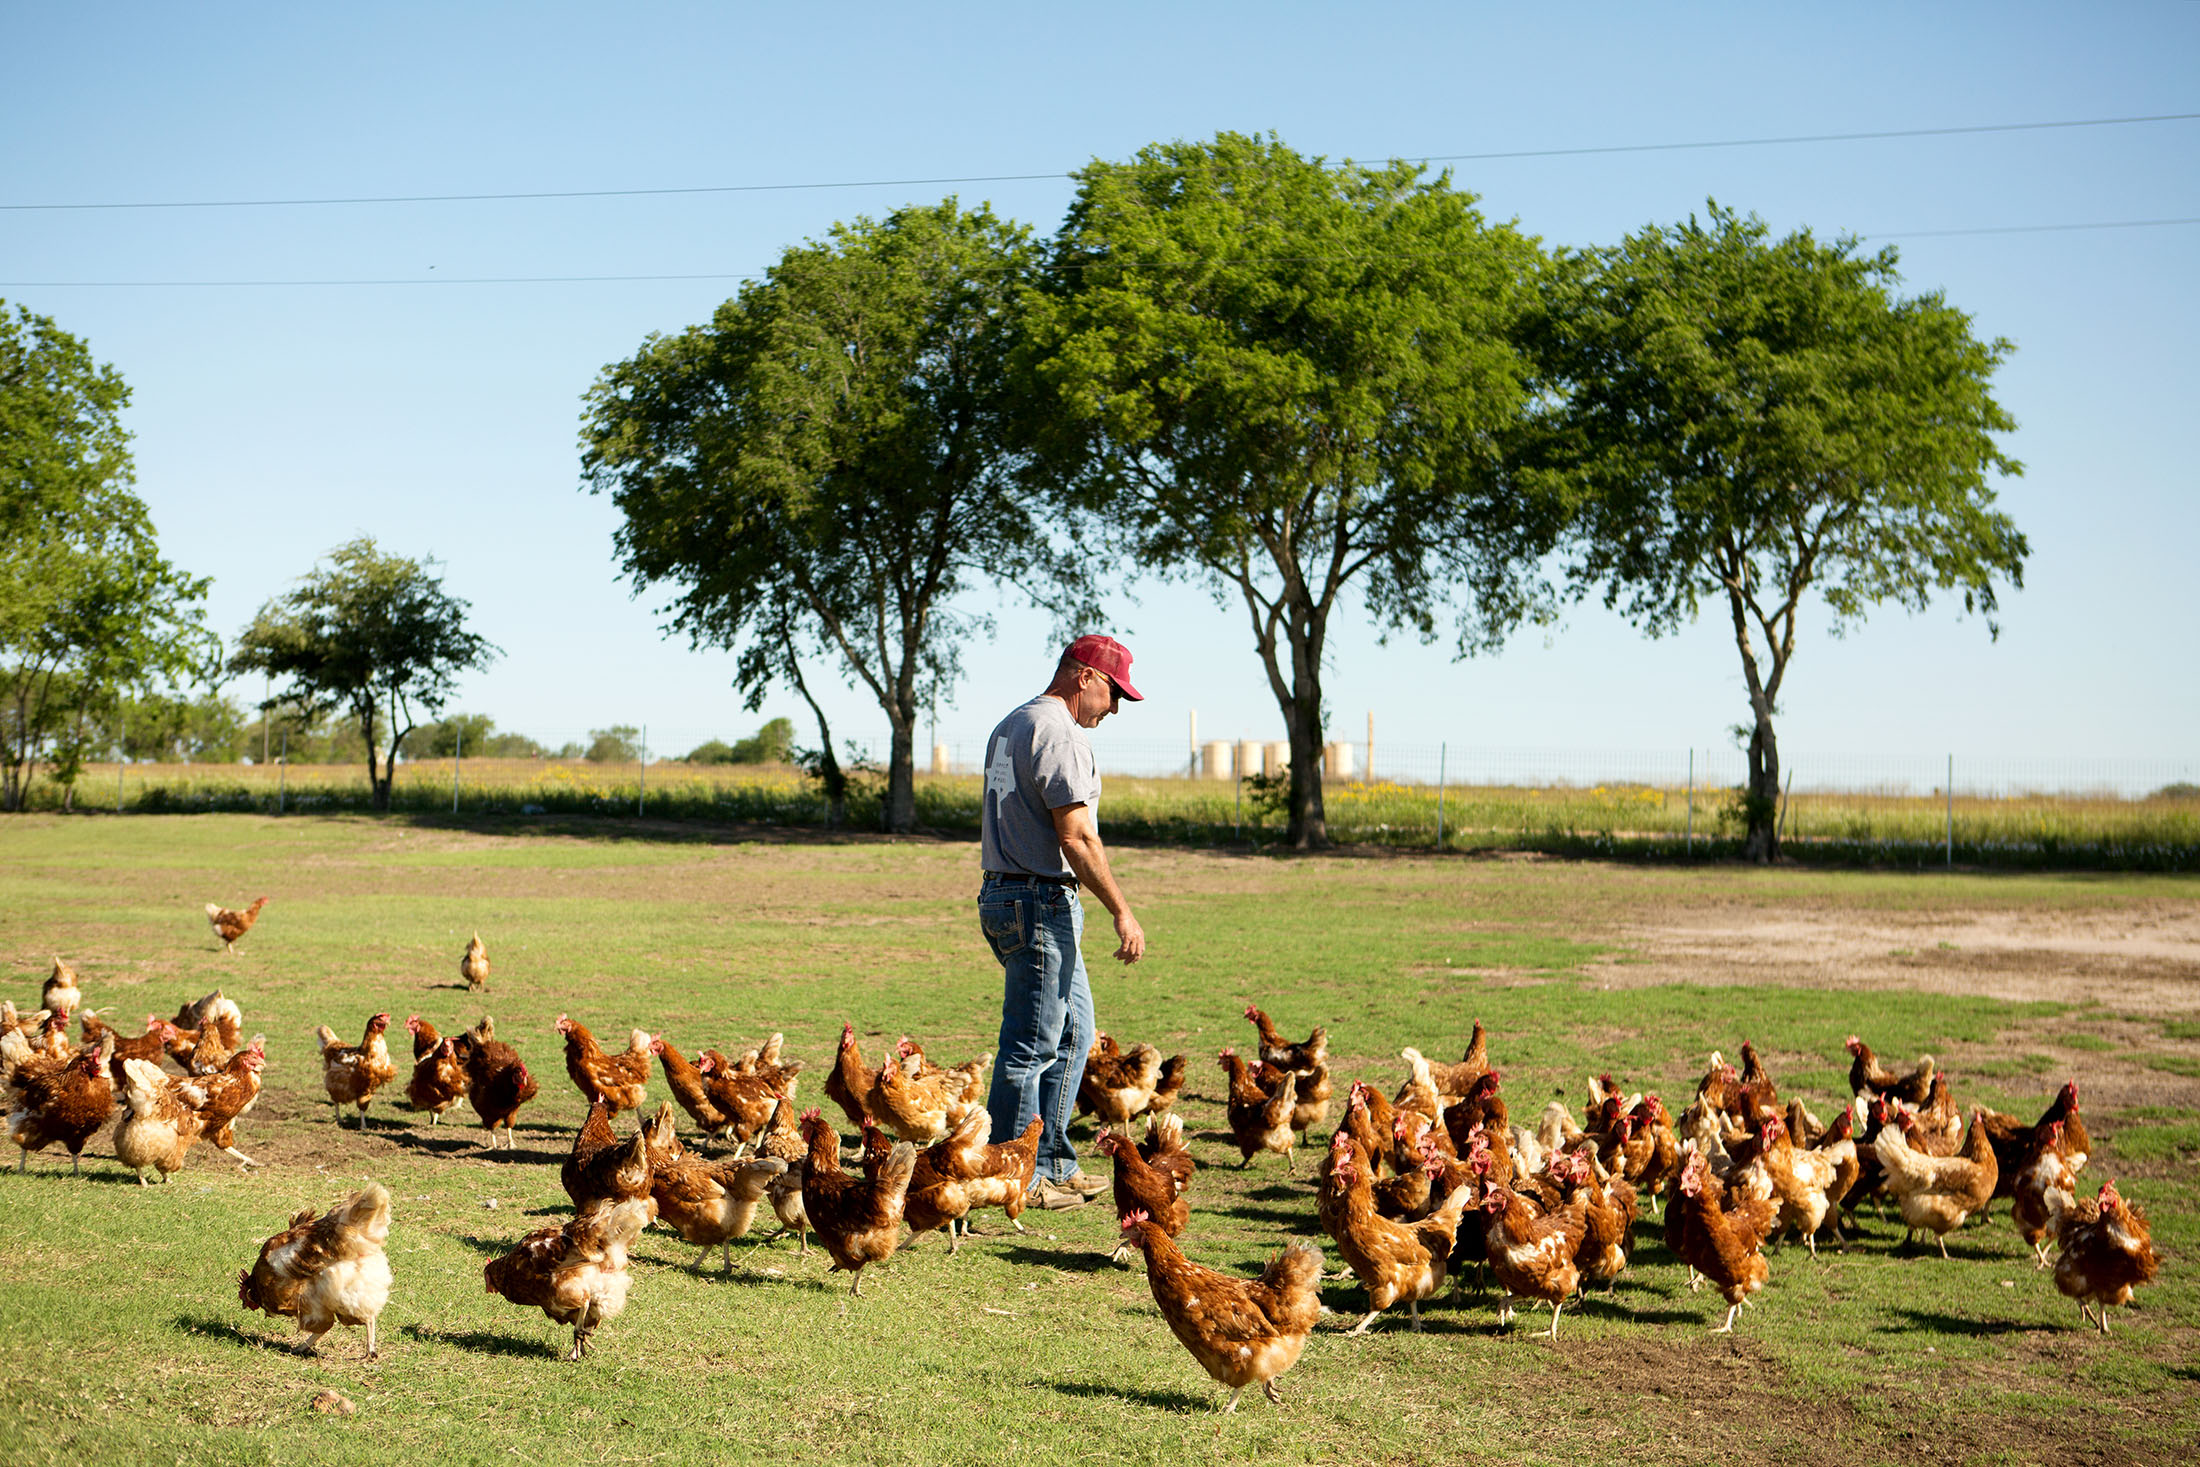 Regenerative Agriculture Pitches Climate-Friendly, Sustainable Eggs to  Shoppers - Bloomberg